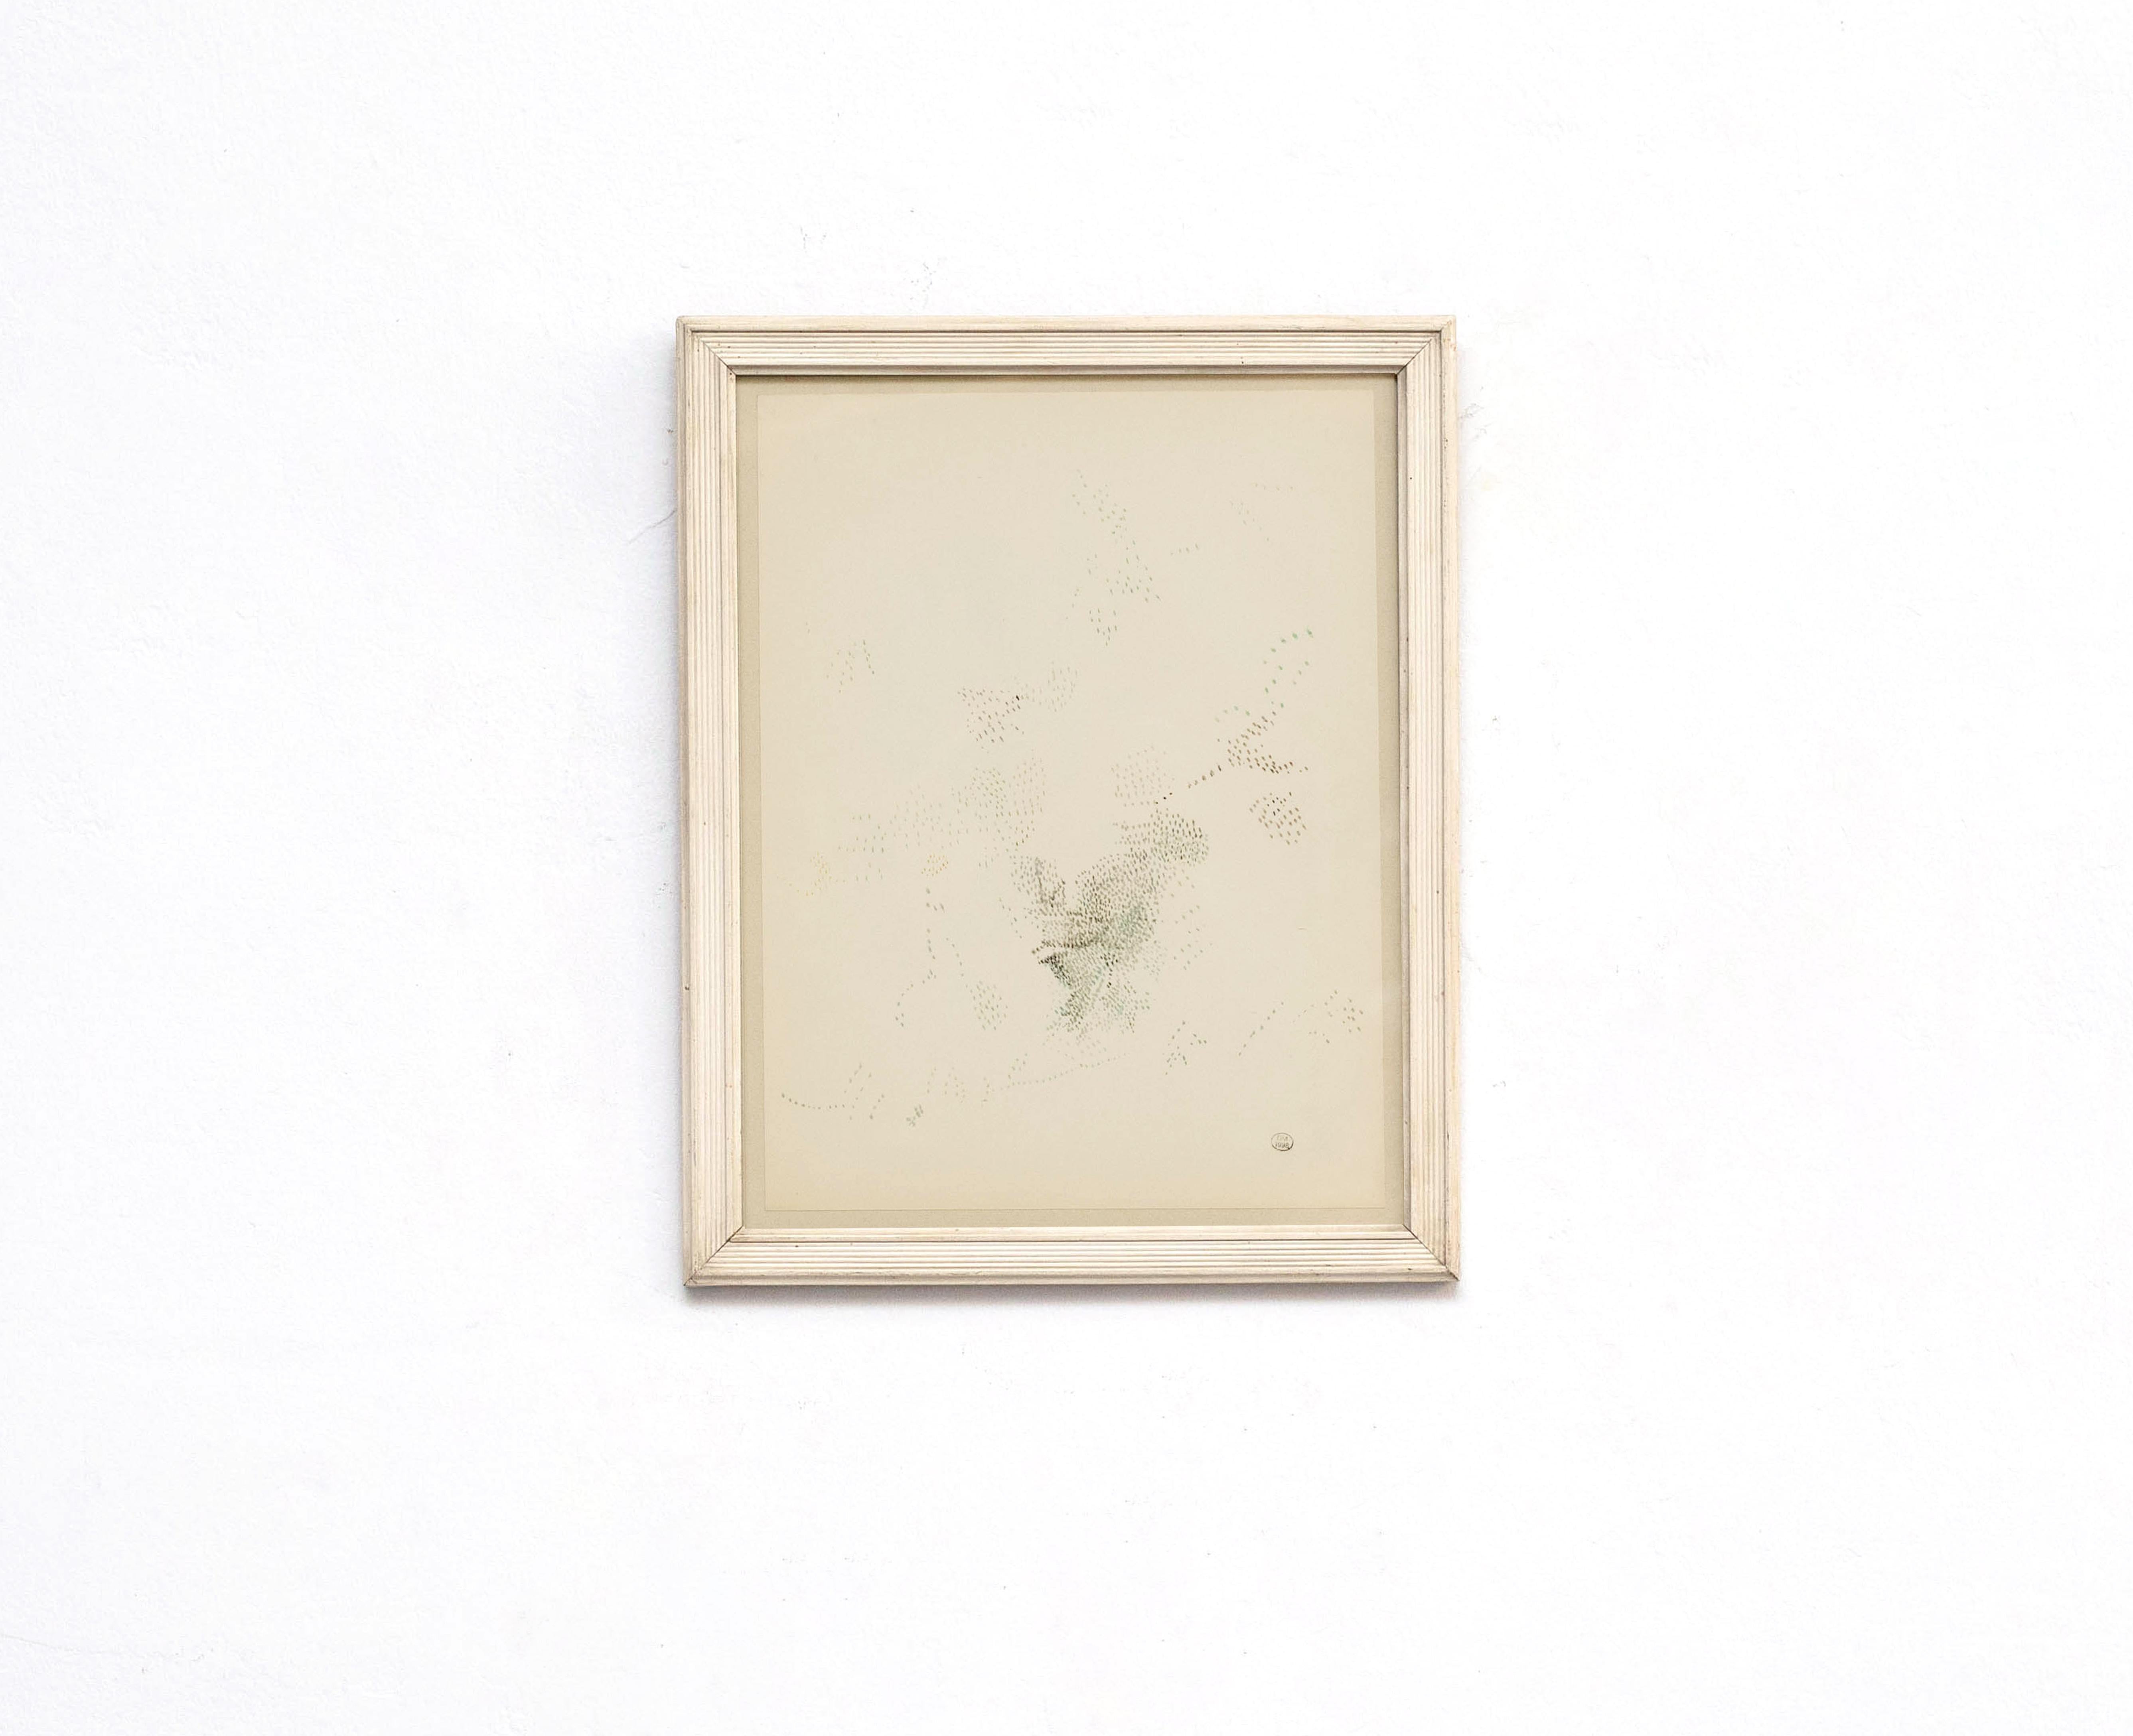 Pointillist composition by Dora Maar.

Authenticity stamp of the auction that took place in 1998 in Paris.
20th Century, undated.

In good original condition, with minor wear consistent with age and use, preserving a beautiful patina.

Dora